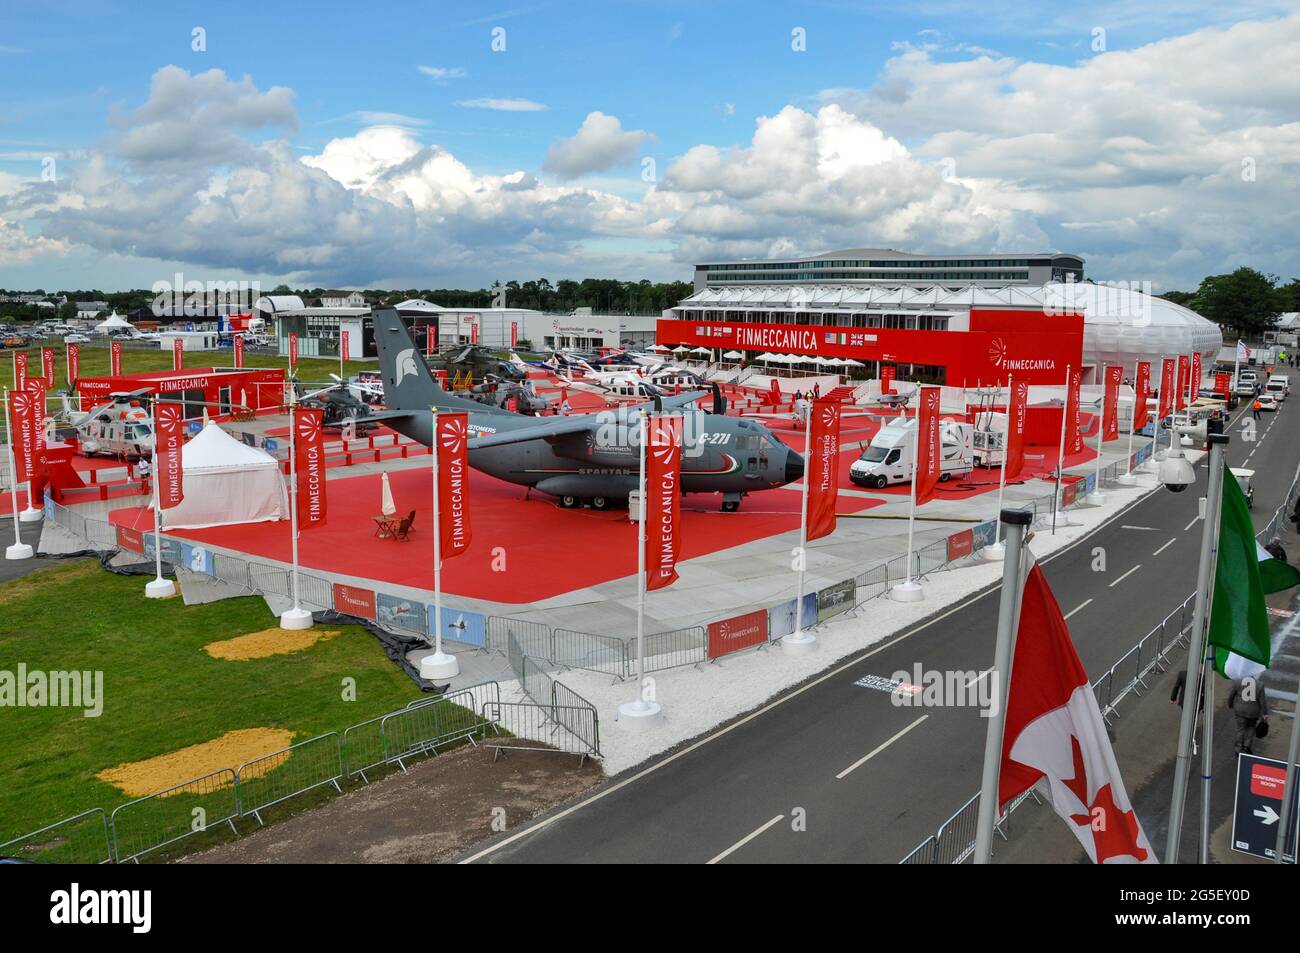 Finmeccanica sales stand at the Farnborough International Airshow trade show 2012, UK. Large exhibit area with Alenia Aermacchi, AgustaWestland brands Stock Photo